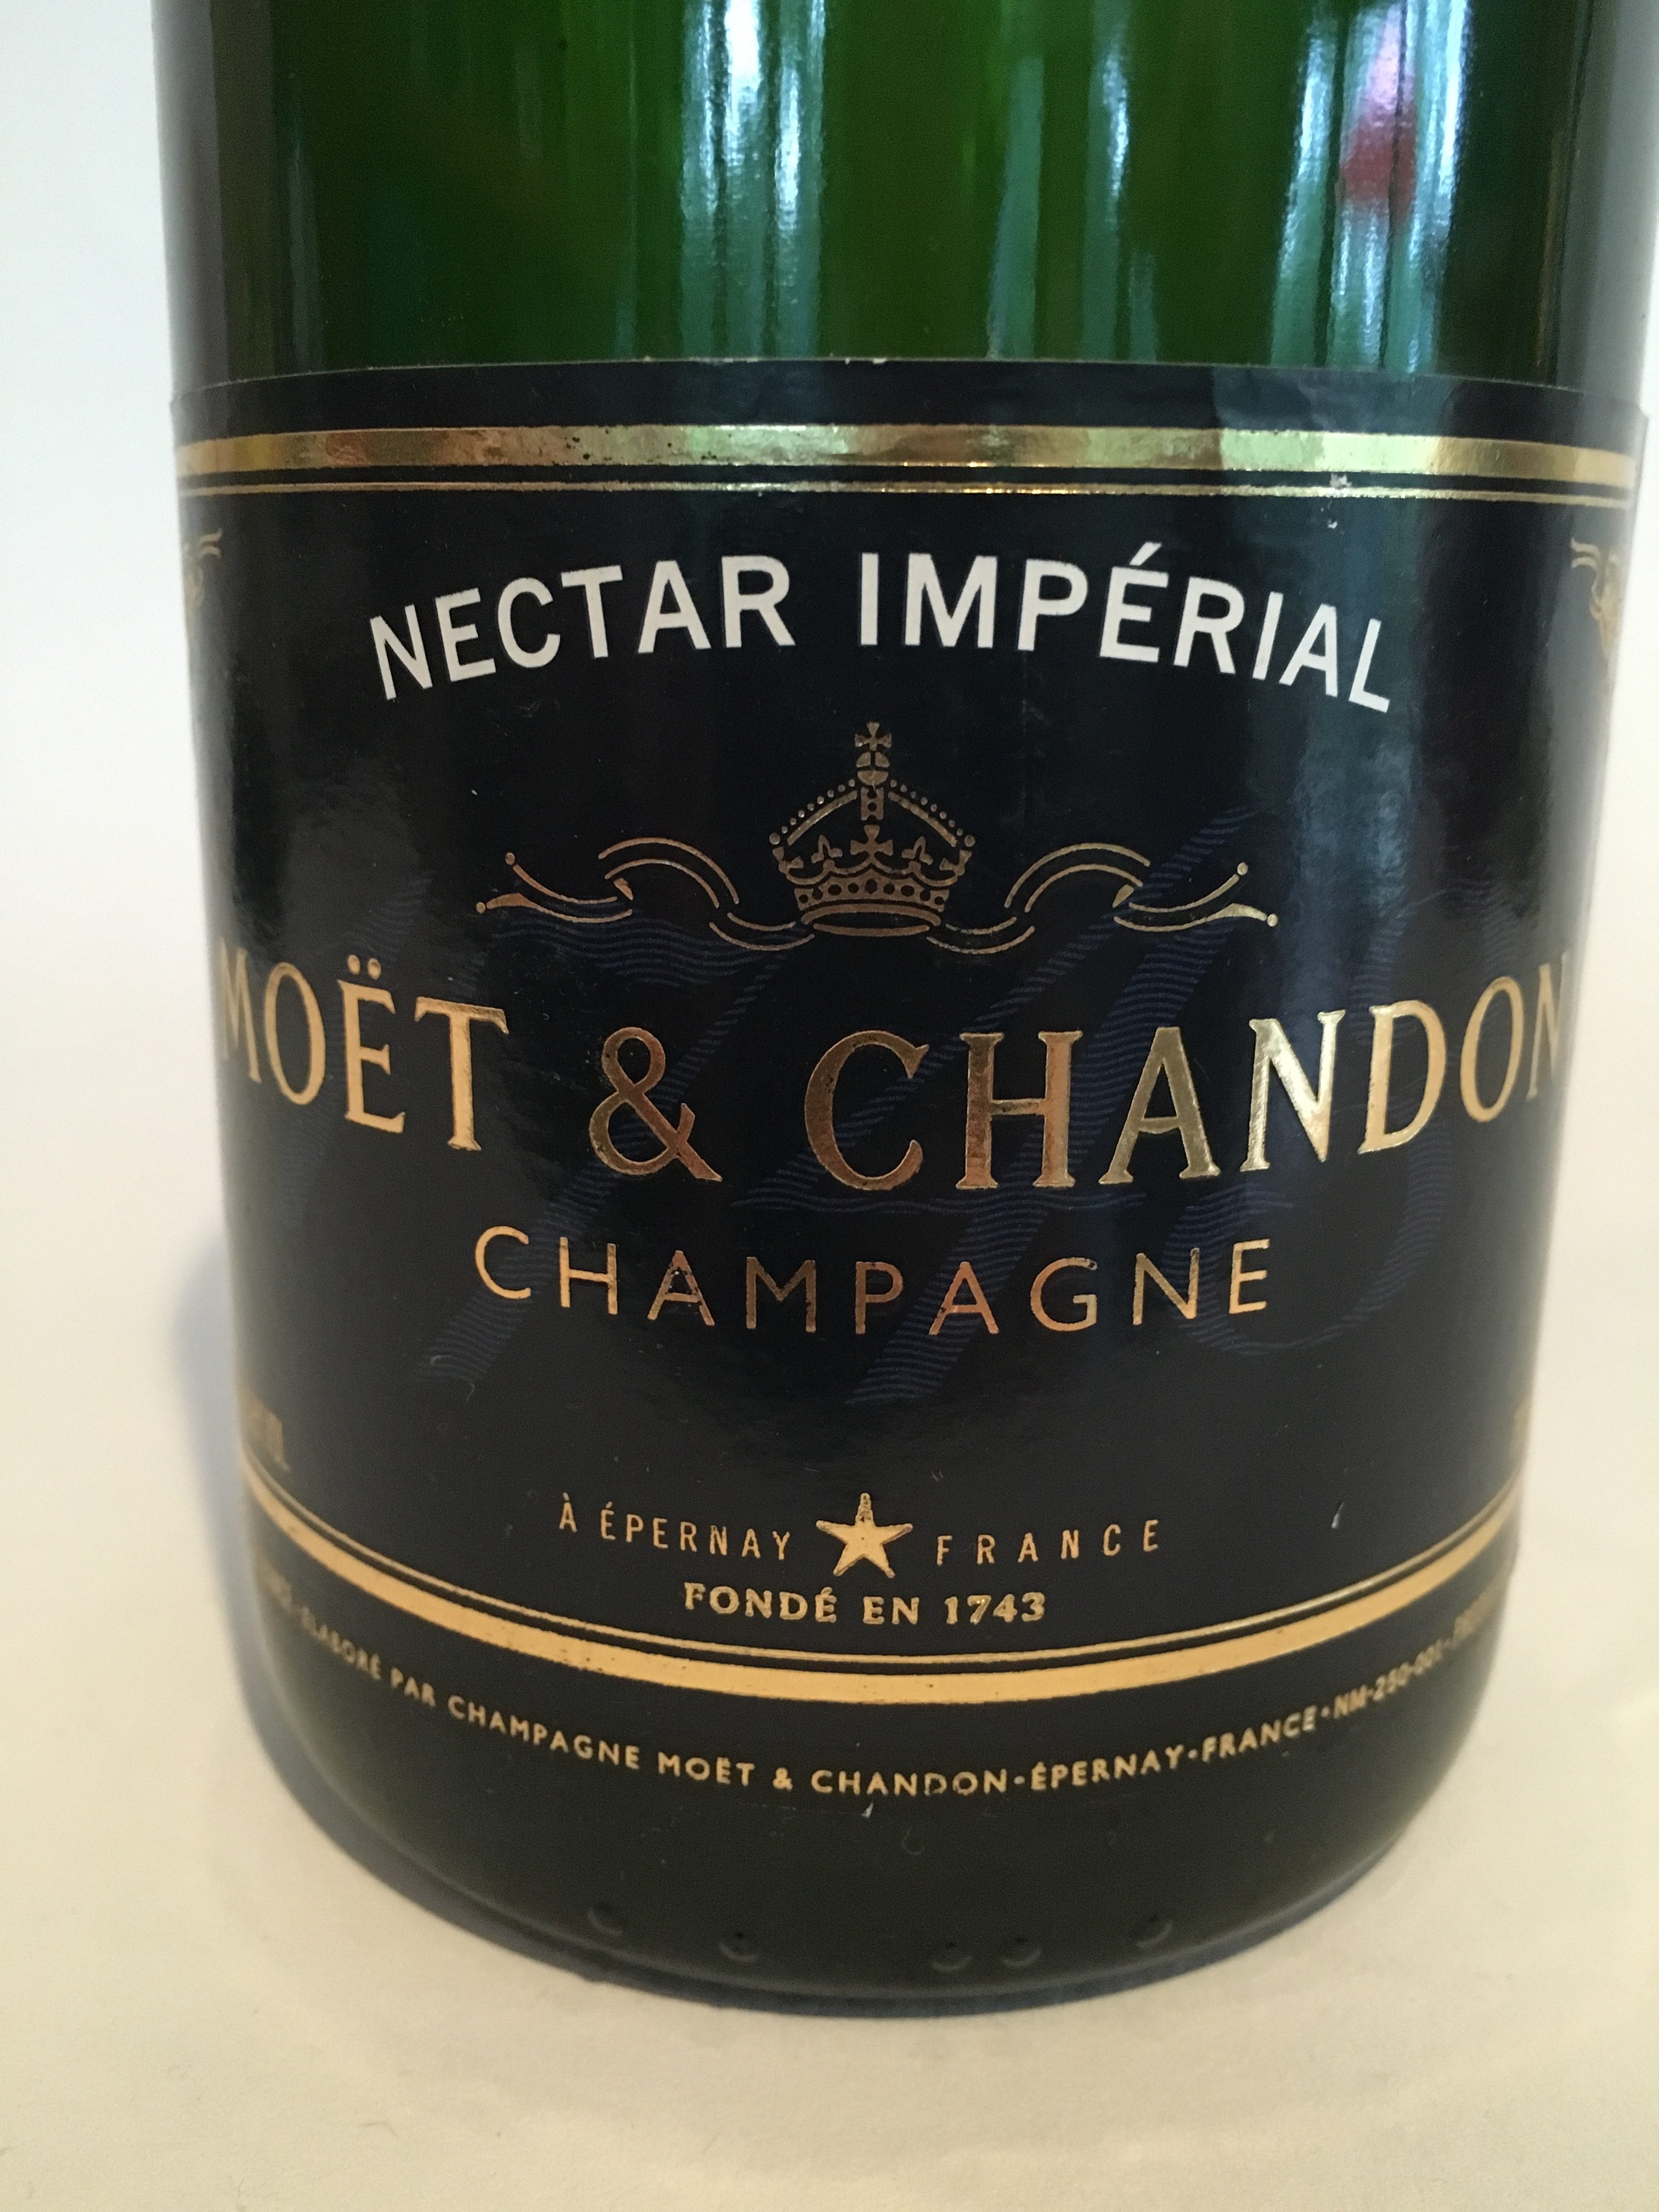 Moet & Chandon Ice Imperial NV 12% ABV 750ml